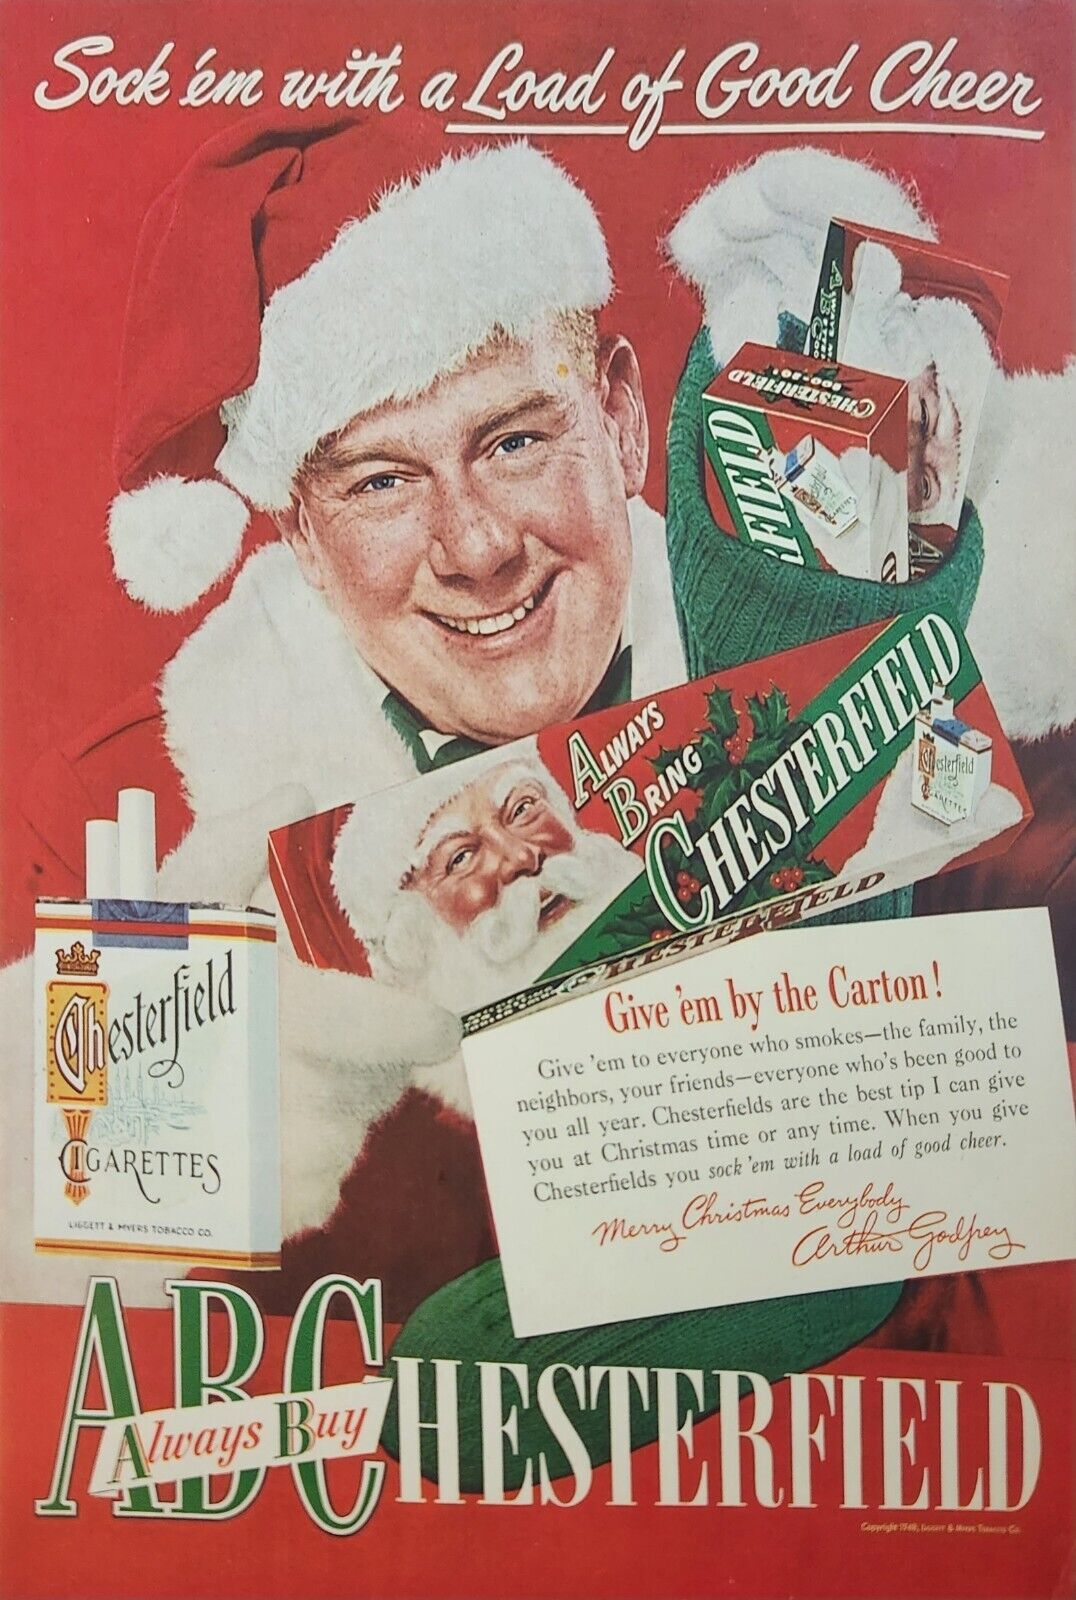 1948 Chesterfield Cigarettes Vintage Ad Sock em with a load of good cheer